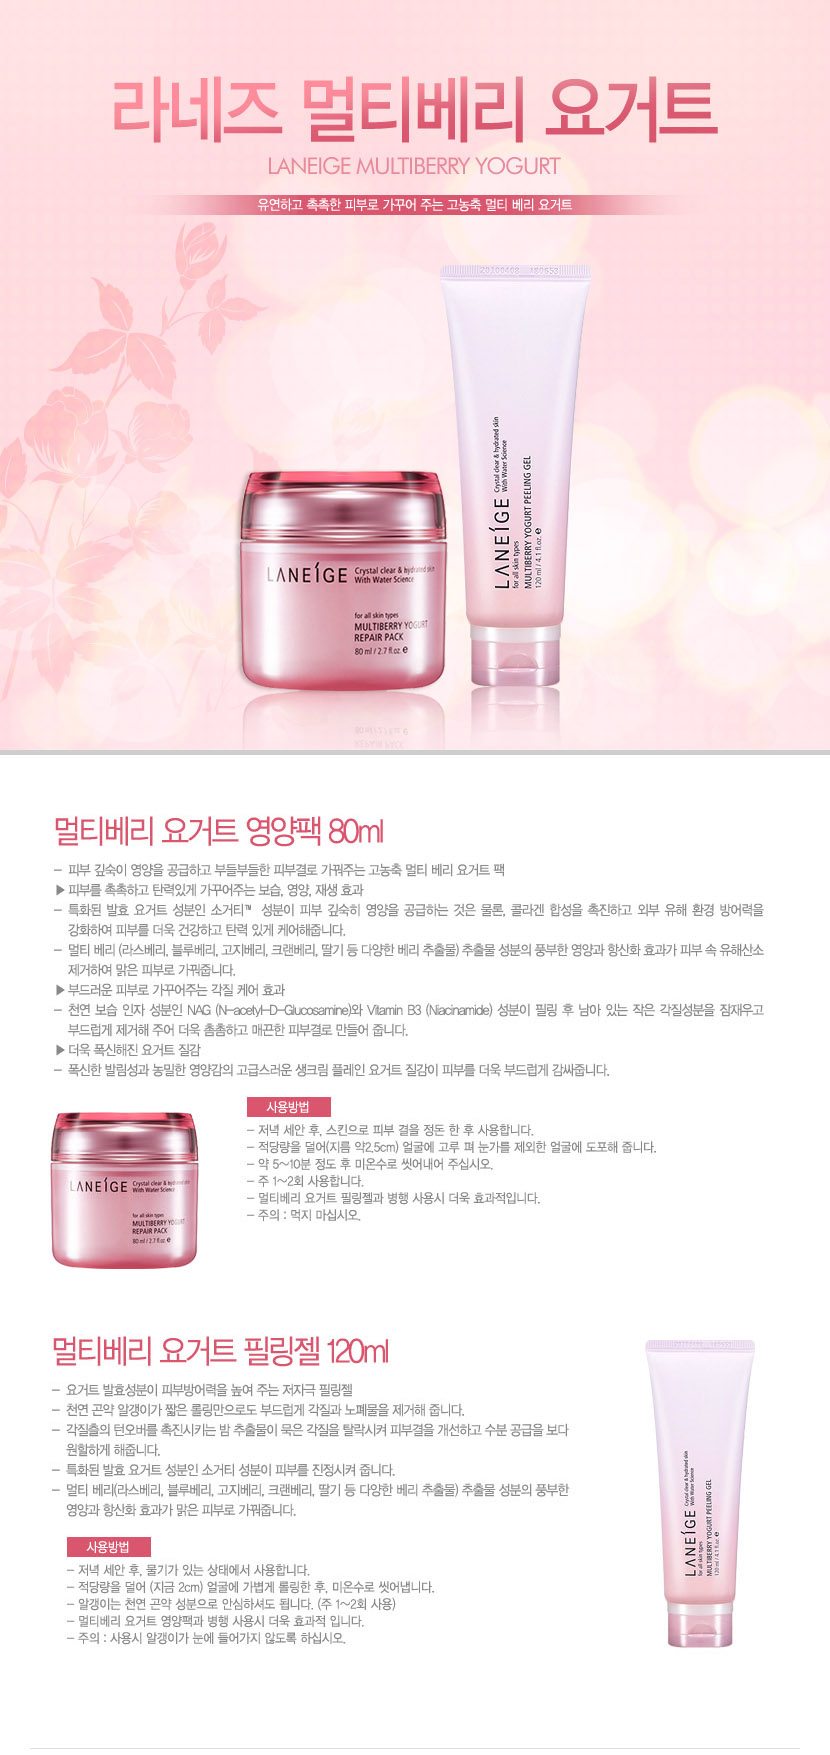 Which retailers sell Laneige Korean cosmetics?